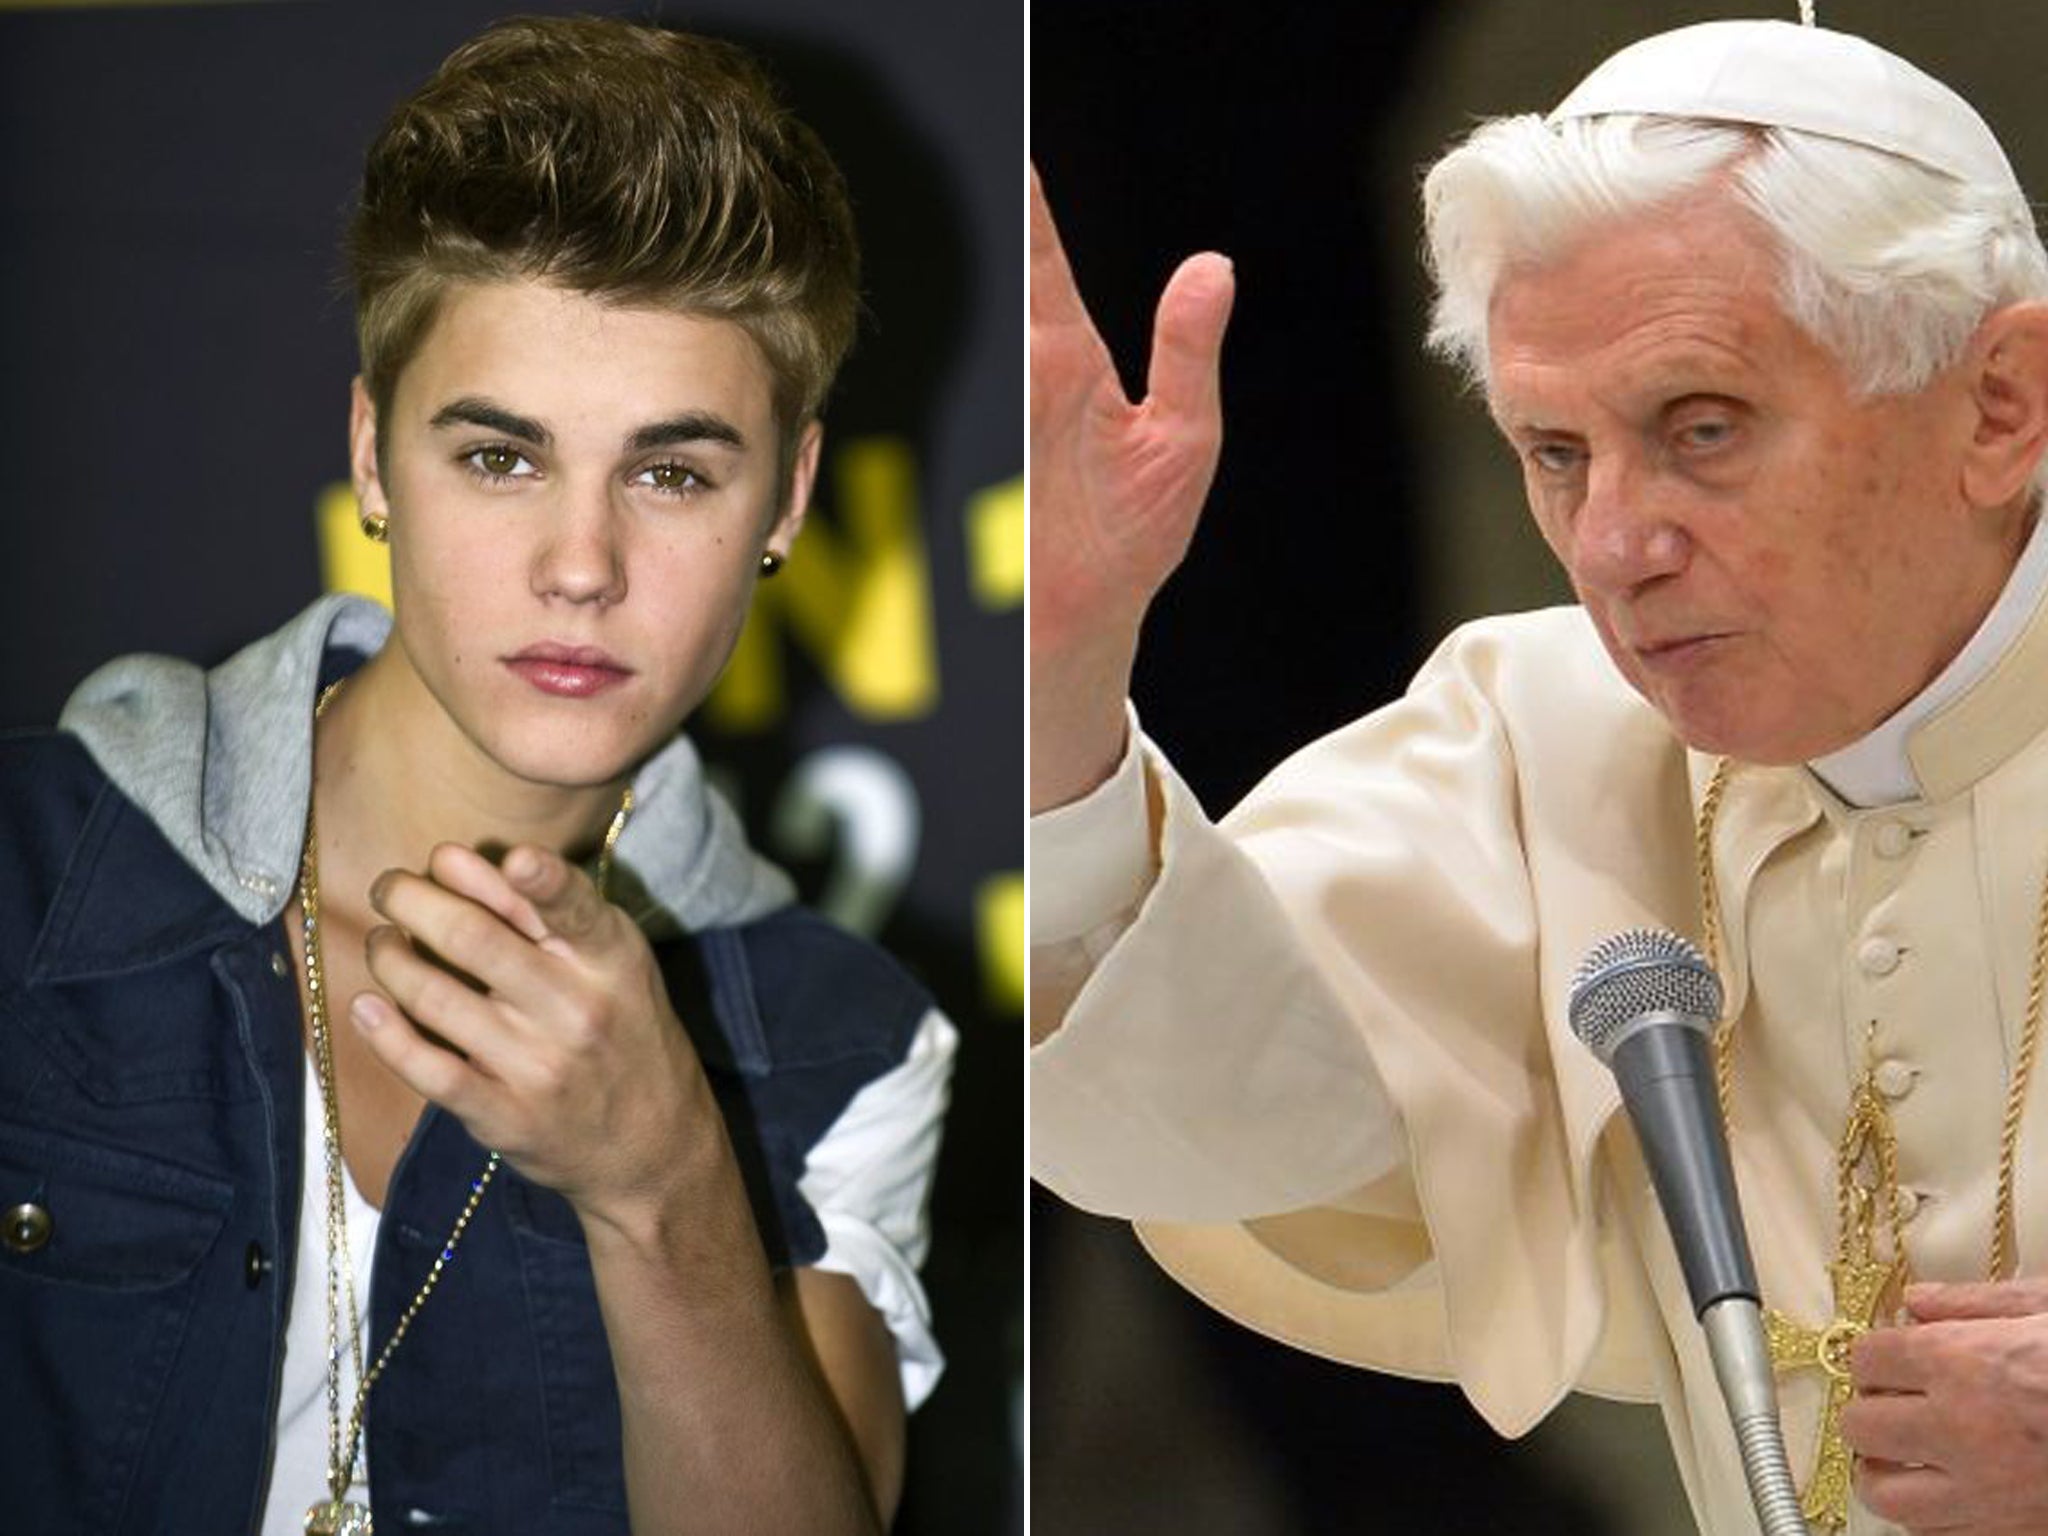 While Canadian singer-songwriter Bieber has roughly 15 times as many followers - 31.7 million - the Vatican newspaper said Benedict had beaten Bieber on retweets